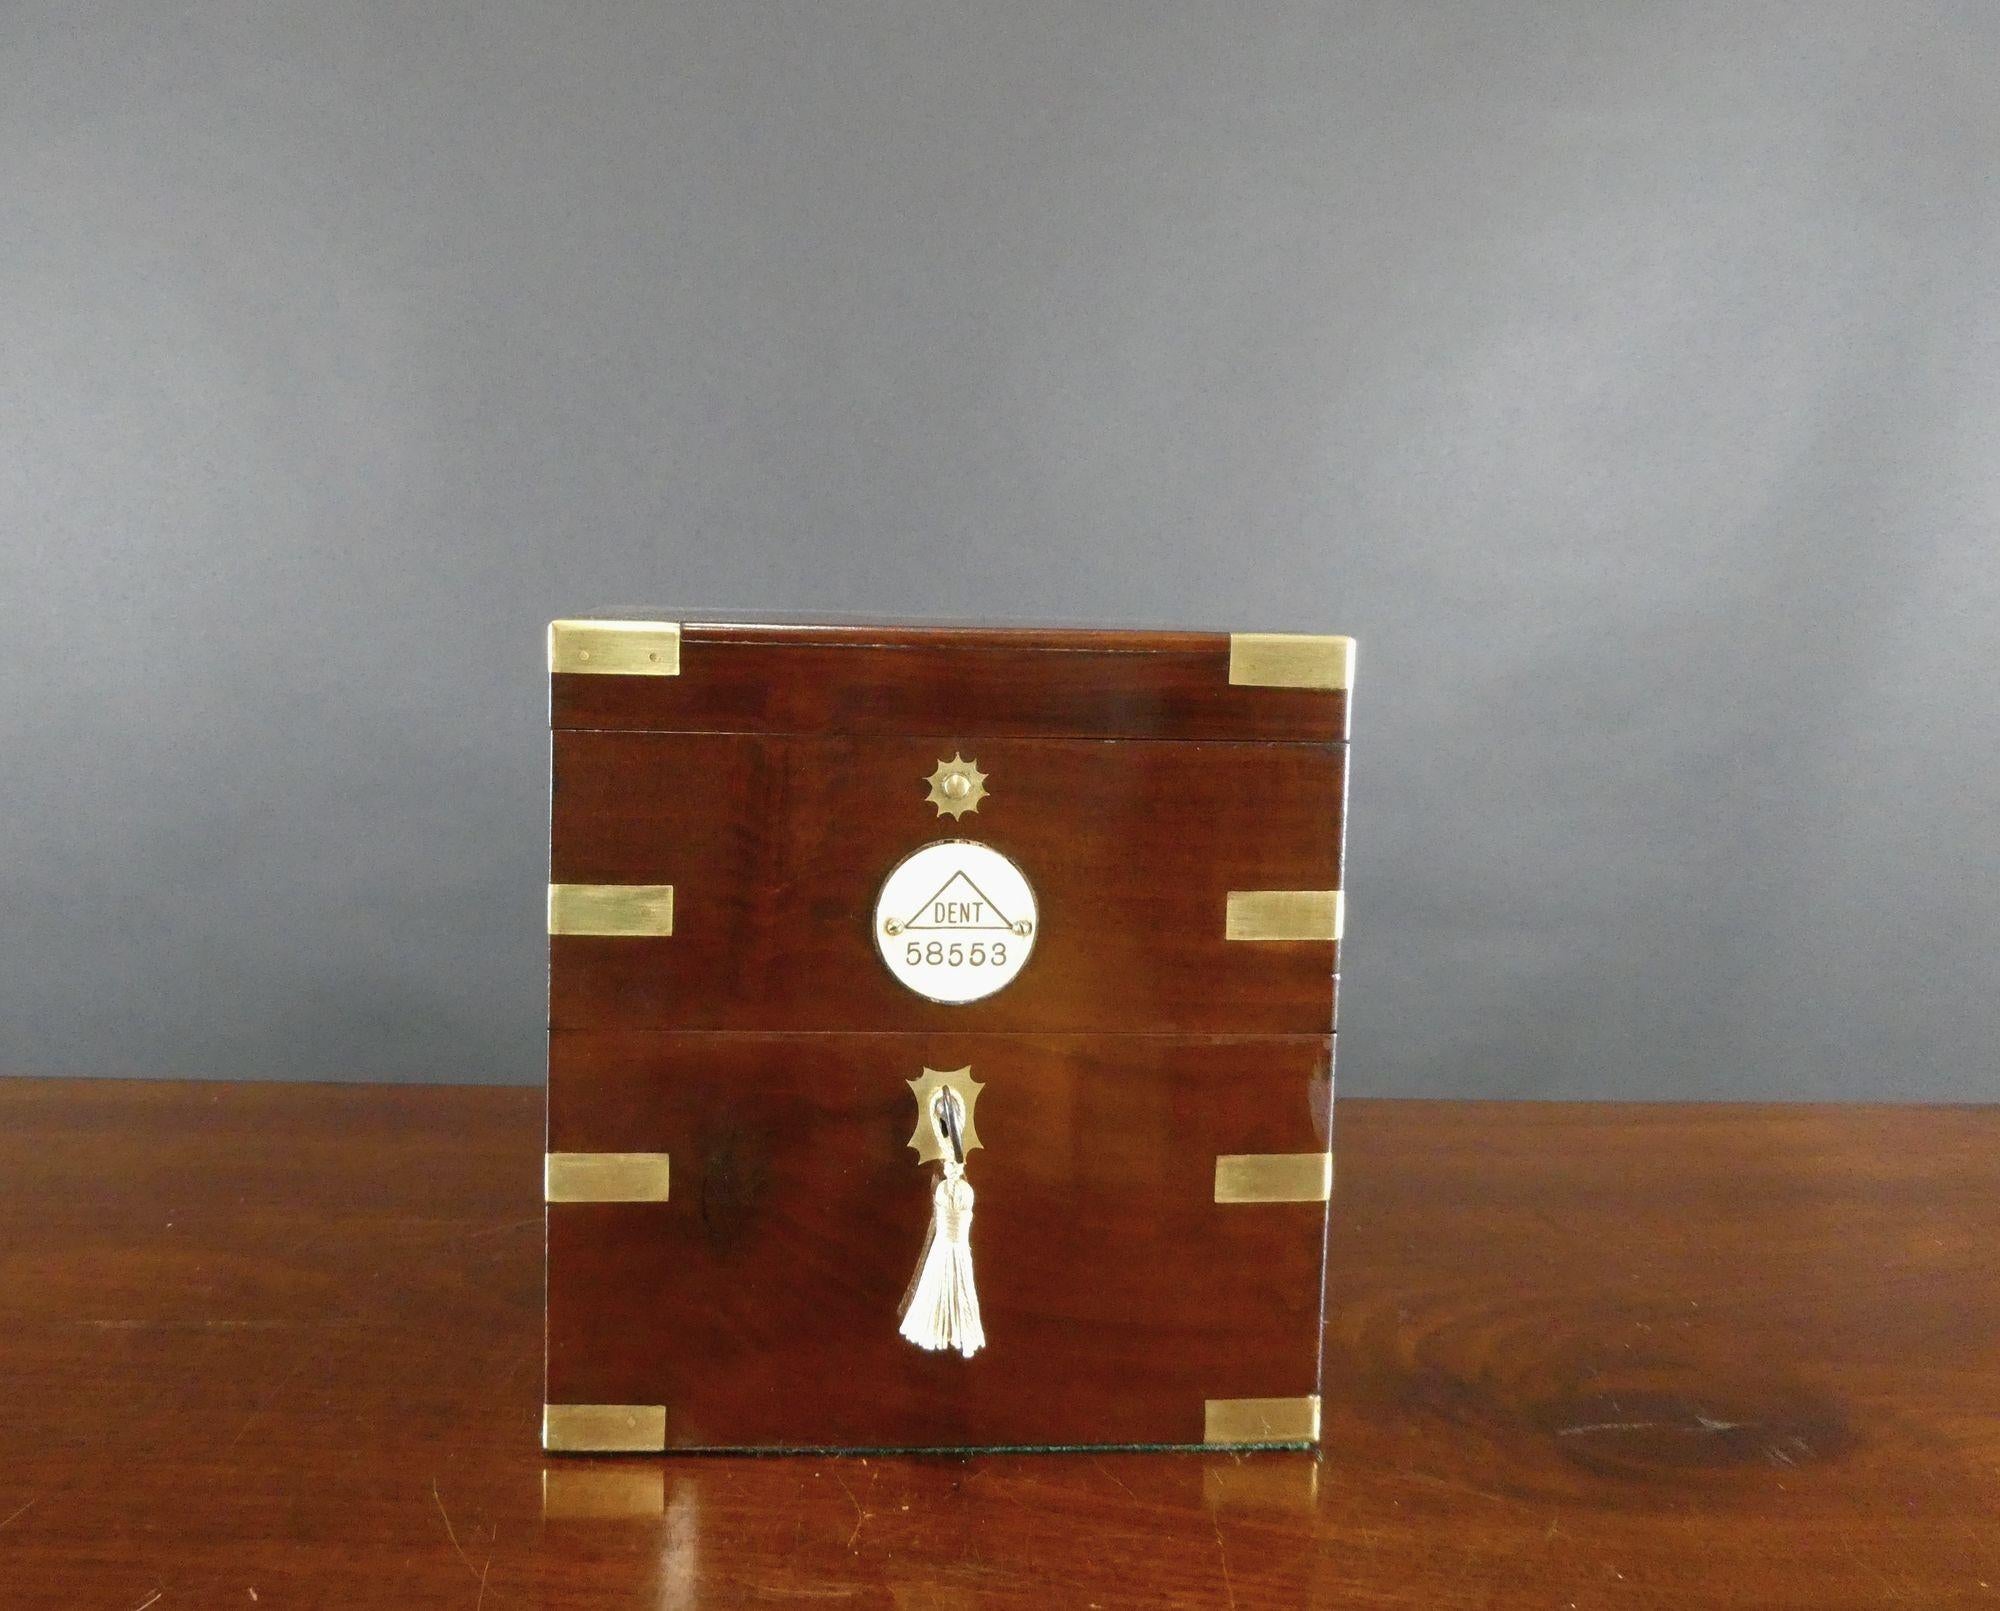 Fine Two Day Marine Chronometer by Dent, London. No58553 6